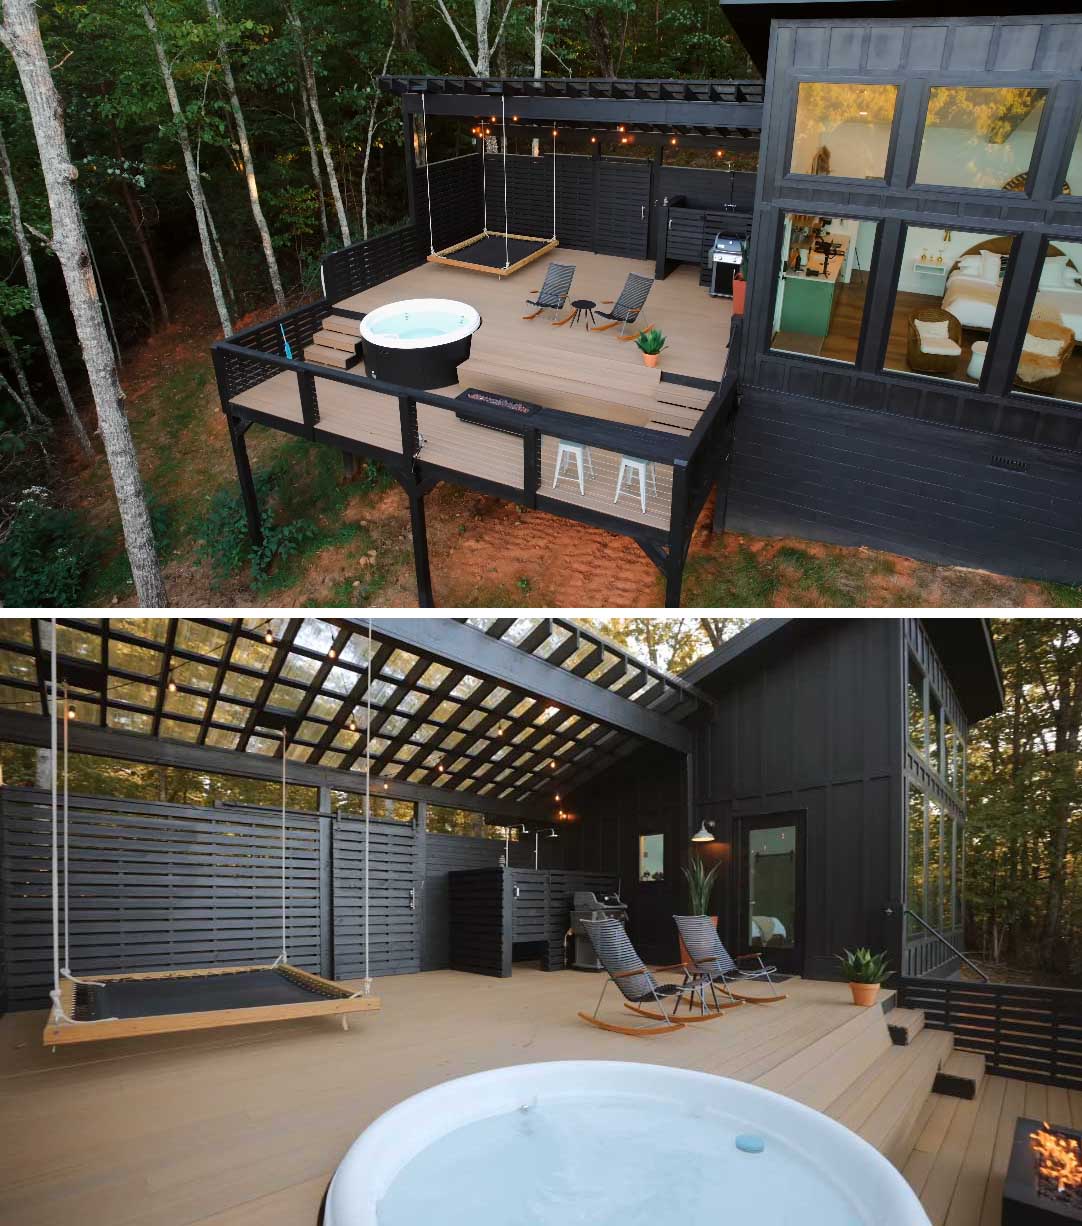 The deck of a modern mountain cabin includes a hot tub, a hanging net bed, a gas fire pit for cool nights, a built-in breakfast bar, and outdoor showers.